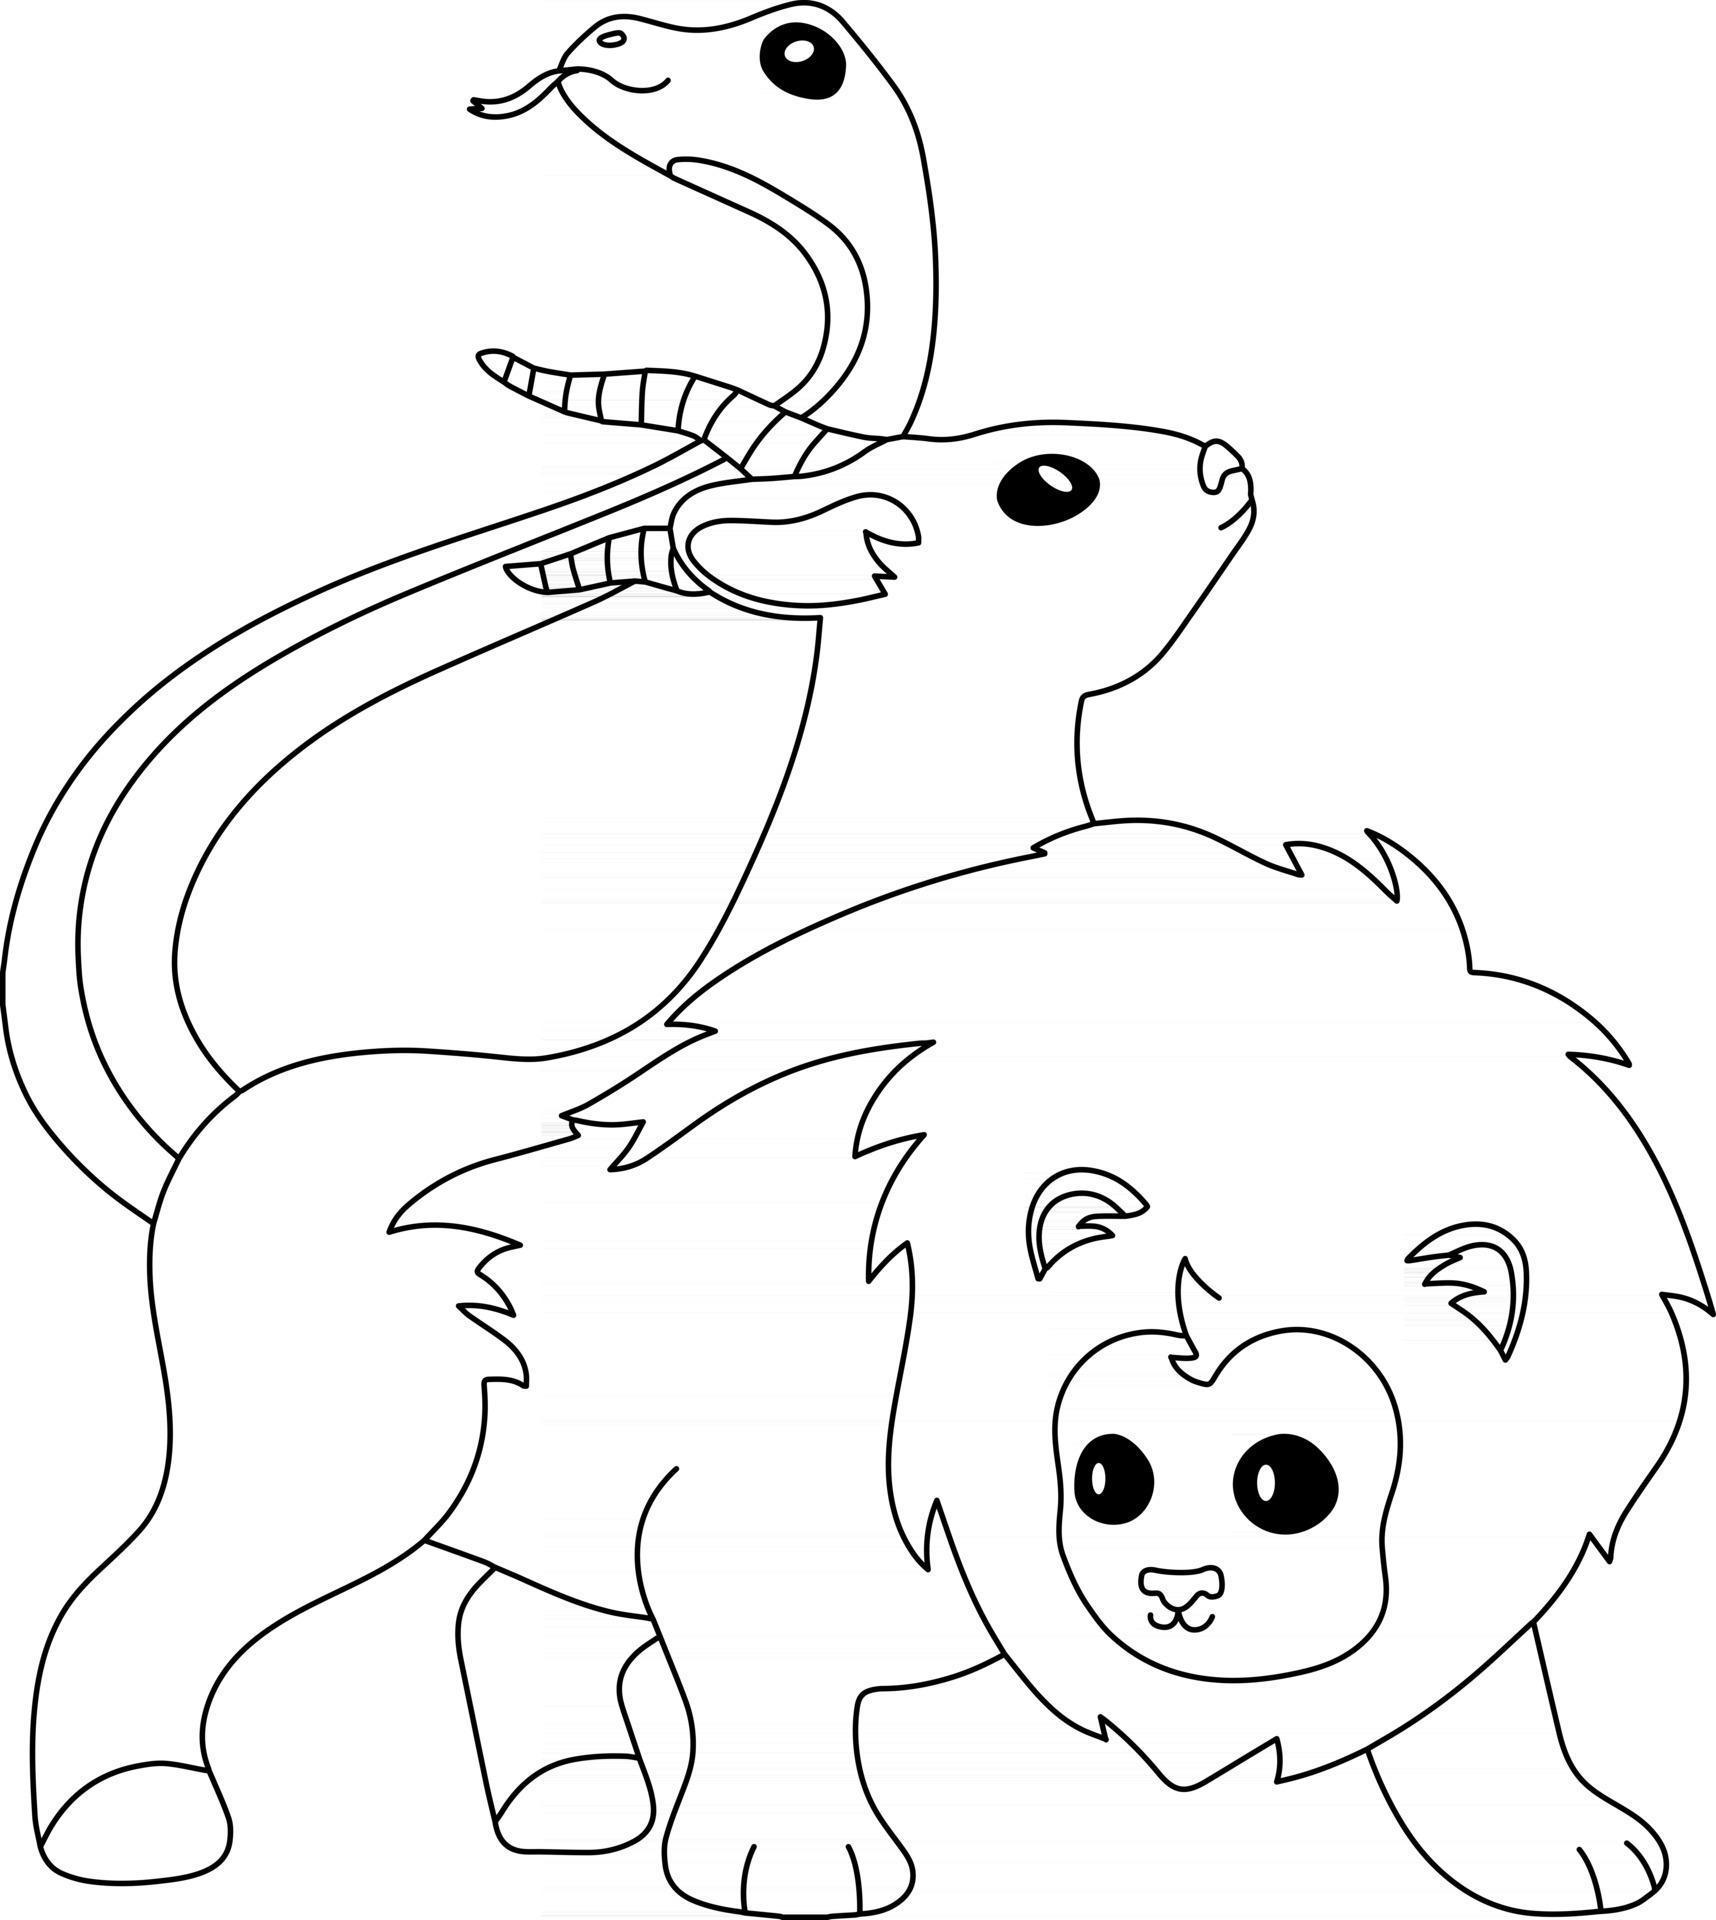 Chimera Kids Coloring Page Great for Beginner Coloring Book 2450156